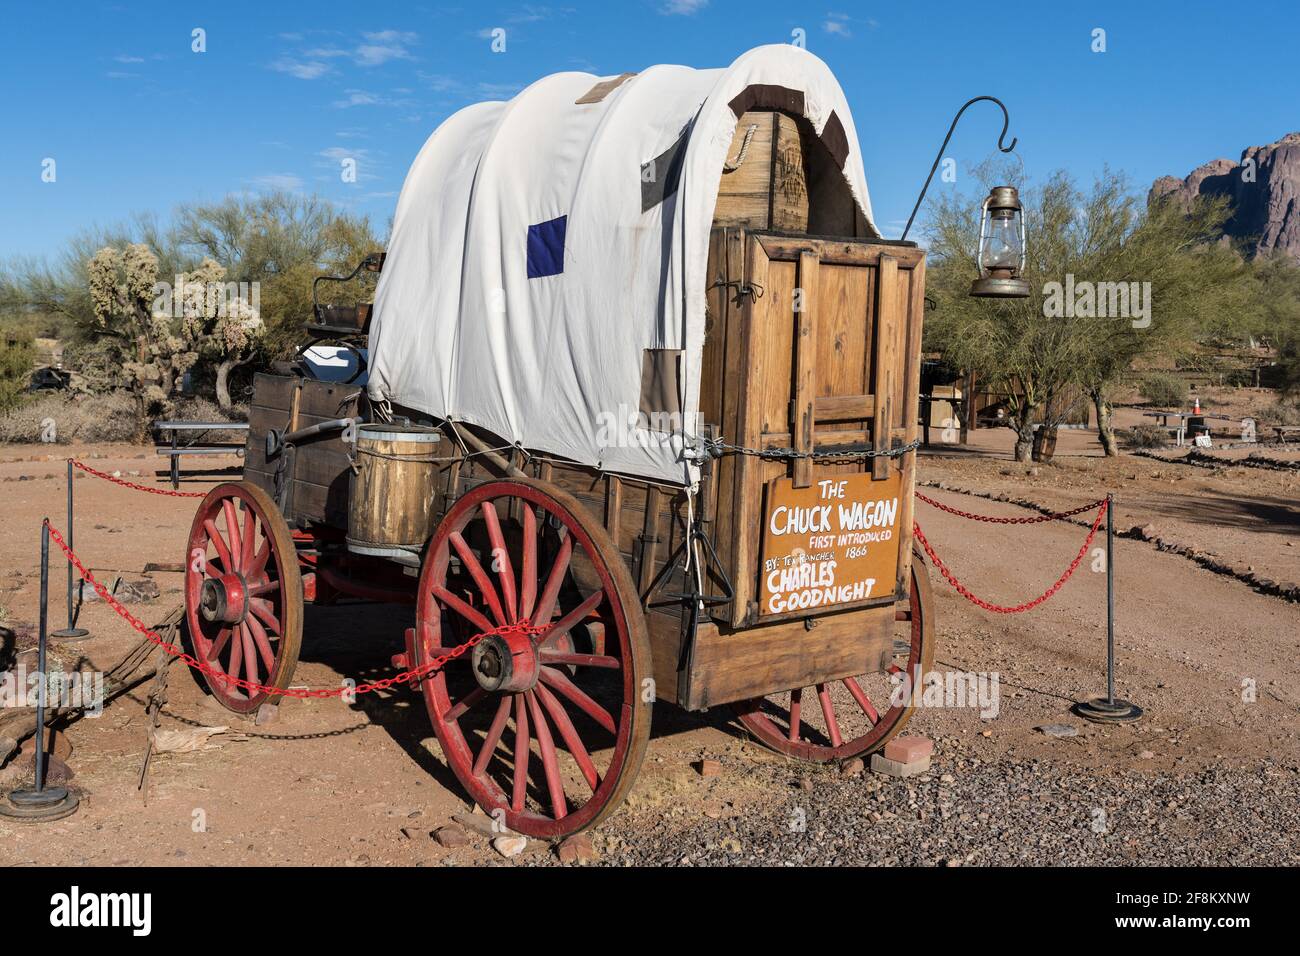 The cowboy chuck wagon was a mobile kitchen designed by cattleman Charles Goodnight to feed his cowboys on long cattle drives.  Superstition Mountain Stock Photo